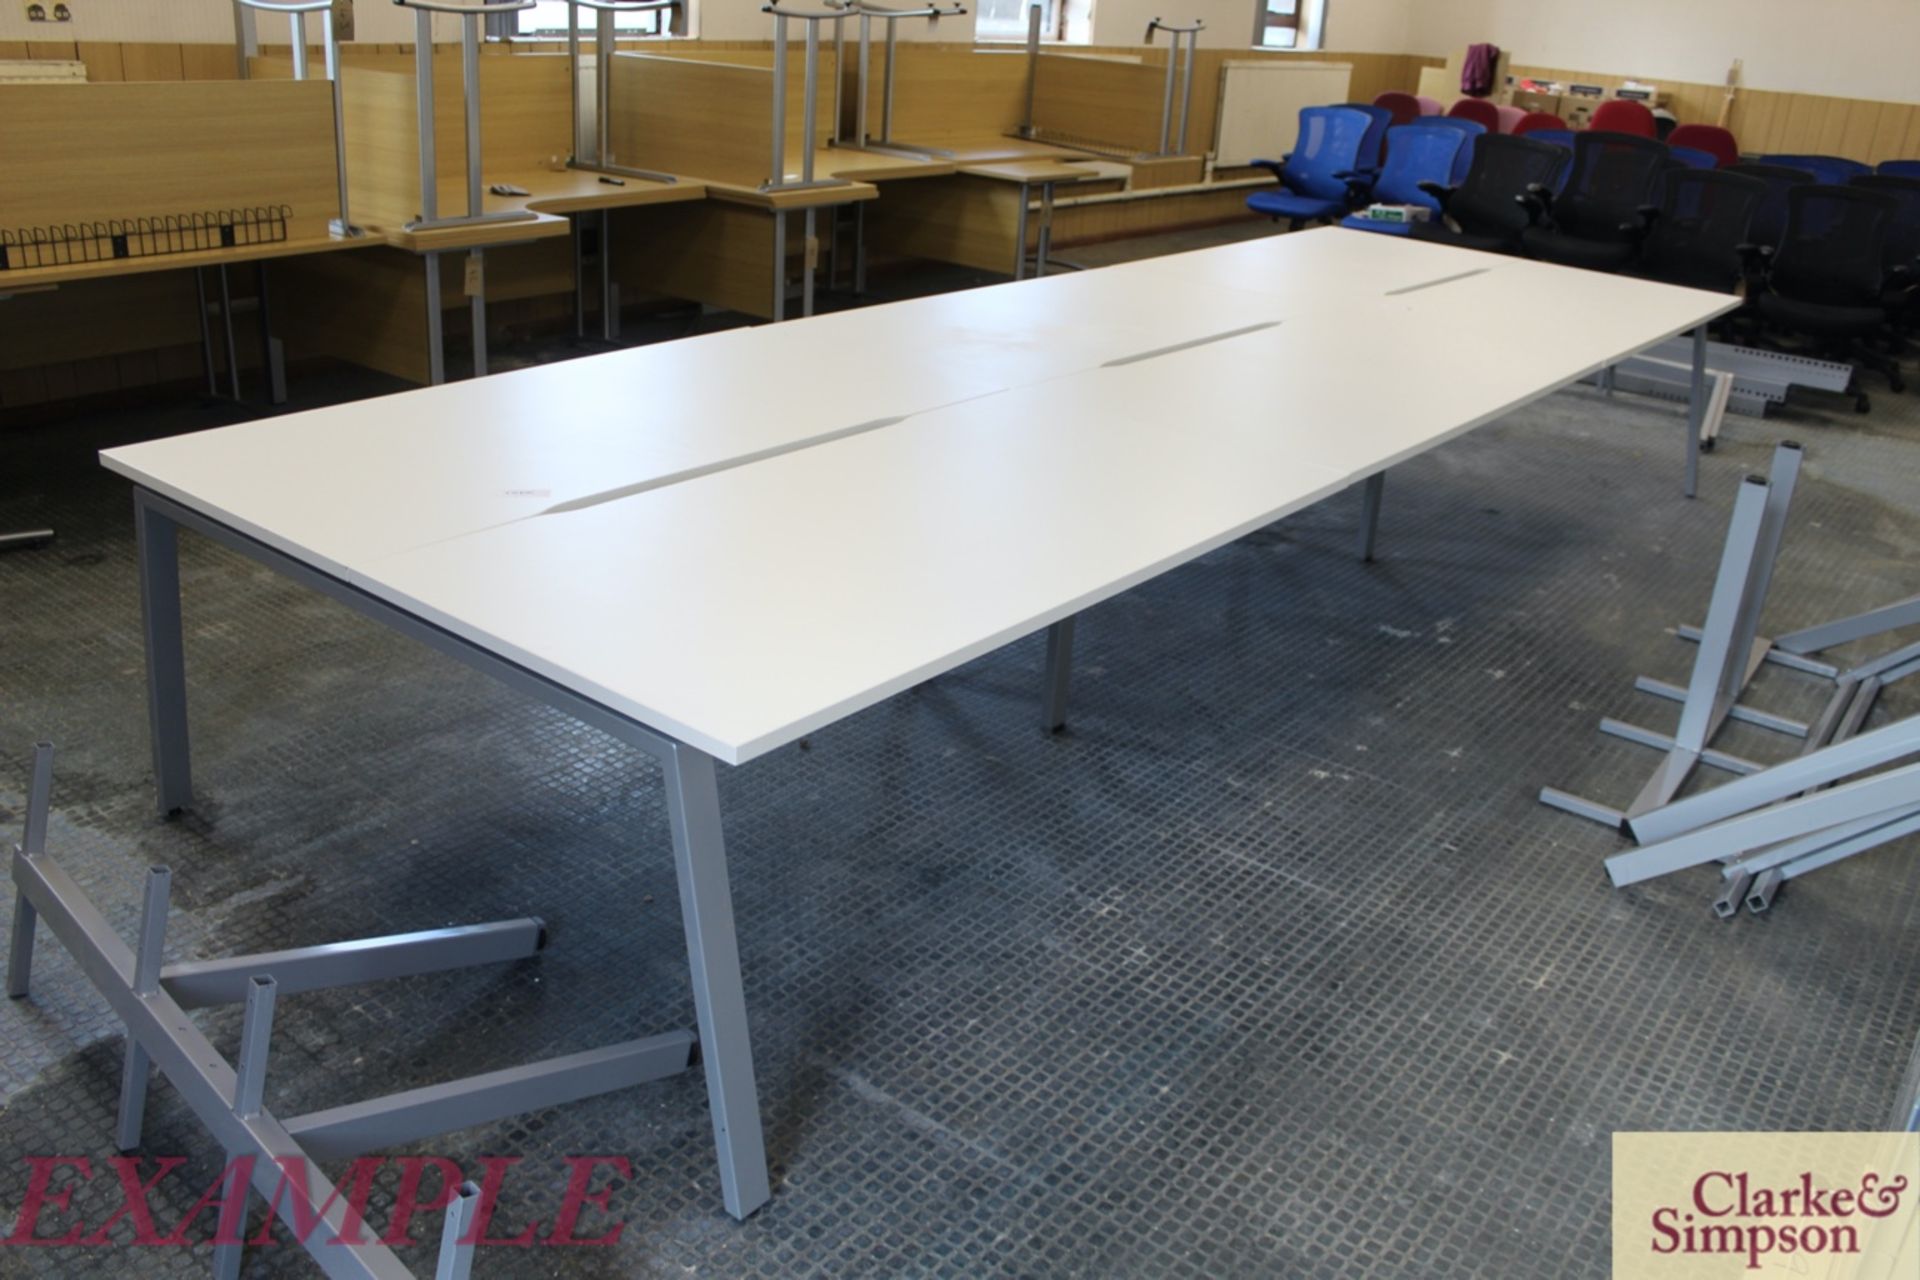 2.4m x 1.6m back-to-back sectional bench desk. Com - Image 5 of 11